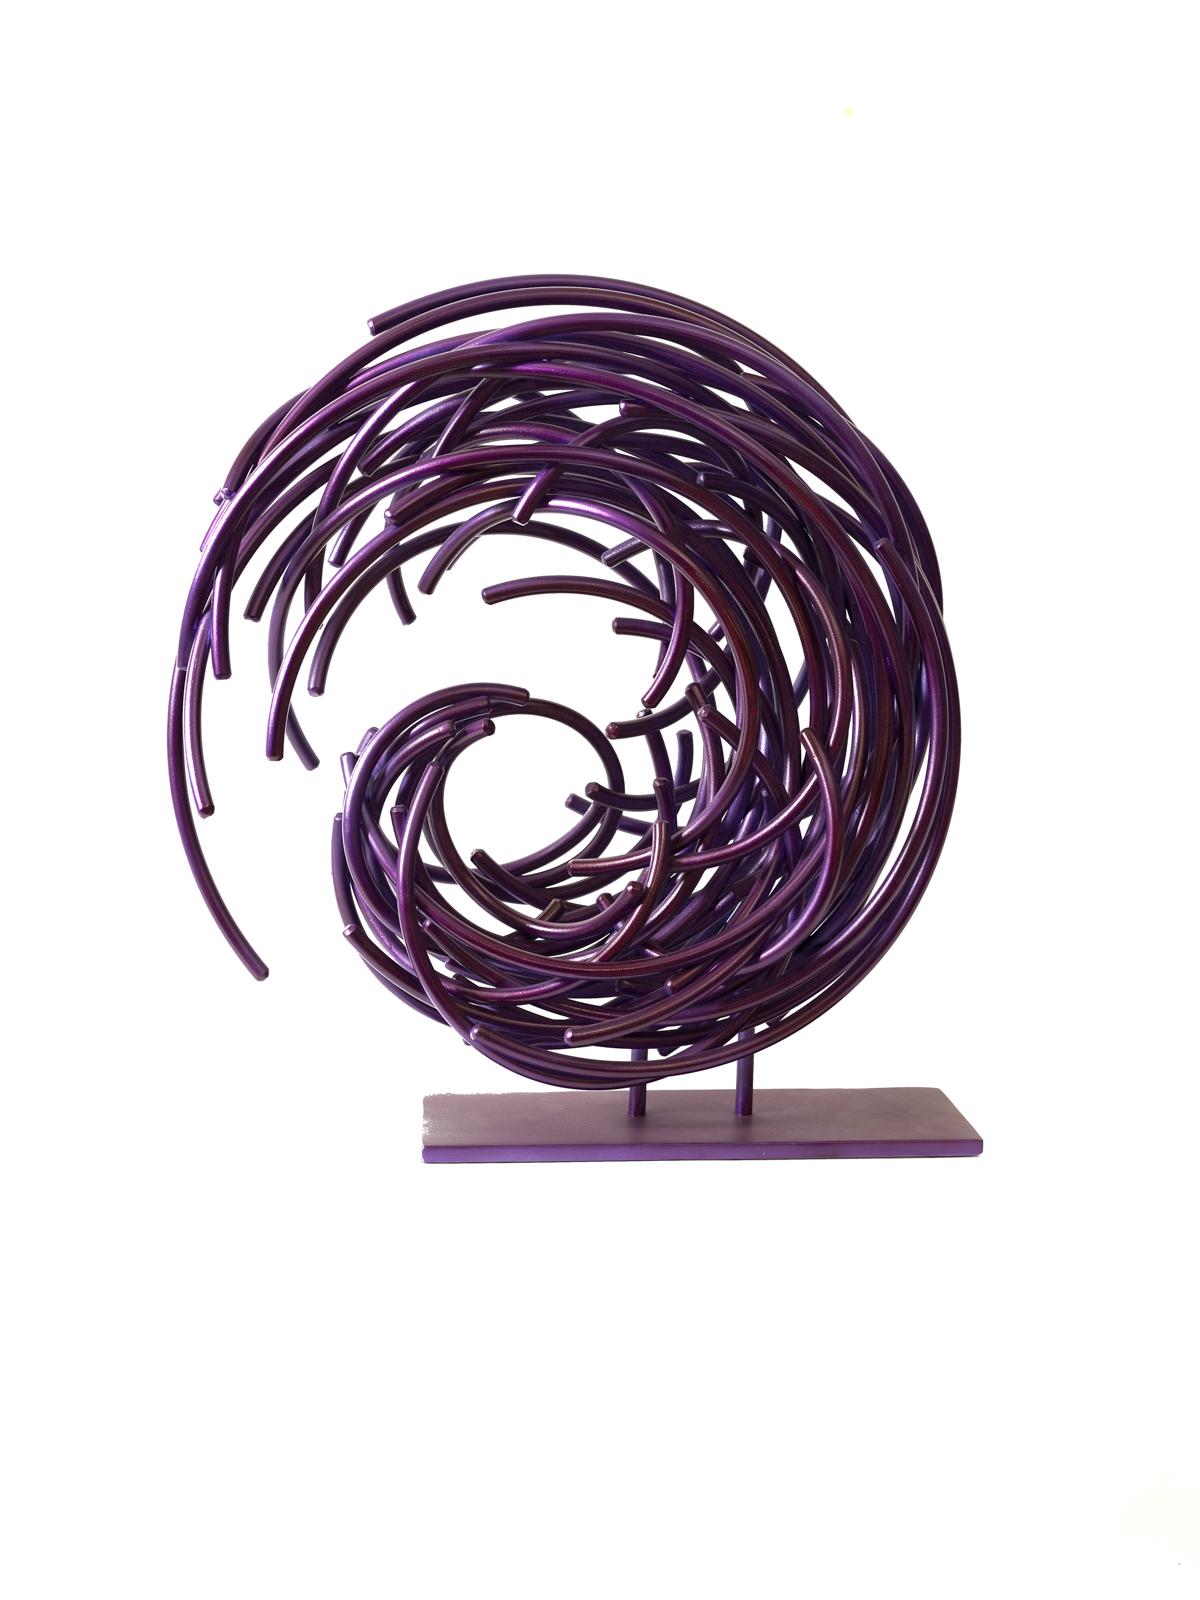 Maelstrom Series No 5 - layered, intersecting, forged aluminum sculpture For Sale 3